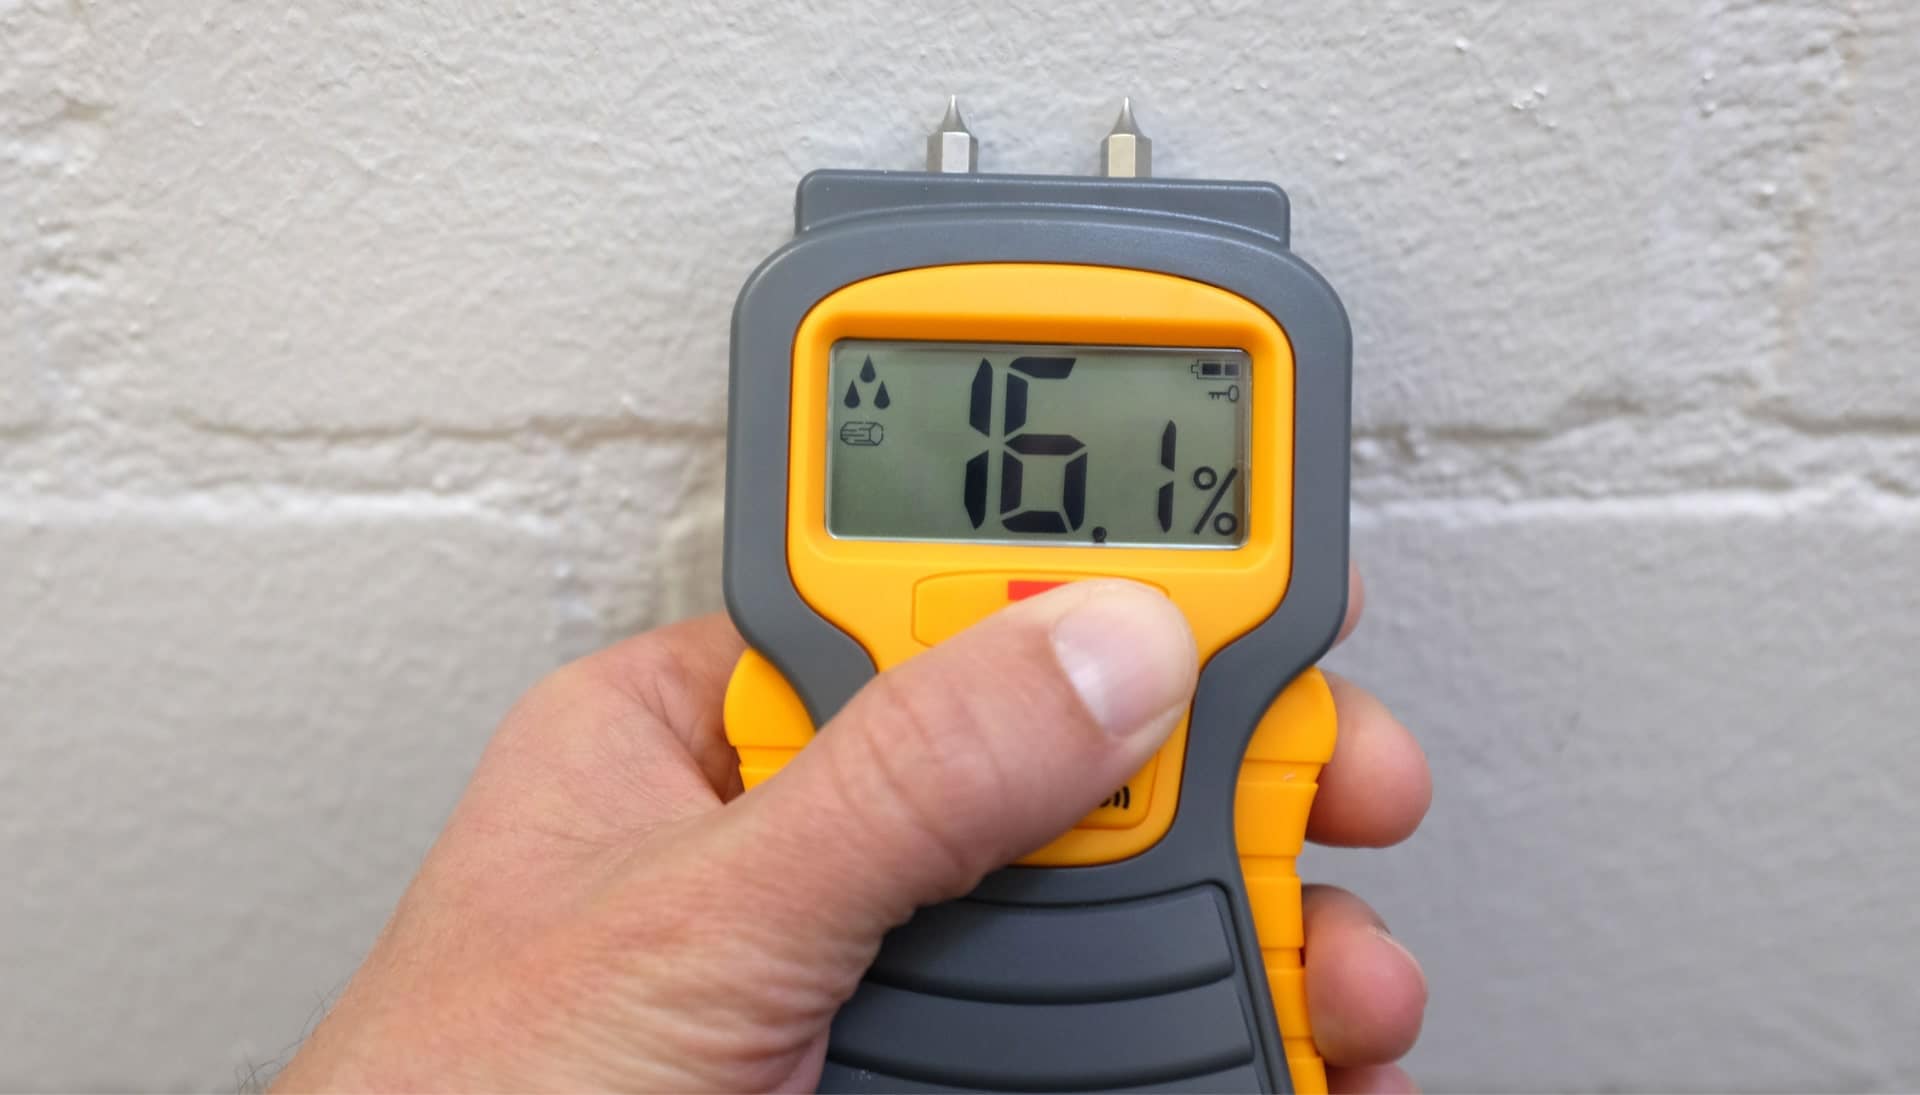 We provide fast, accurate, and affordable mold testing services in Cary, North Carolina.